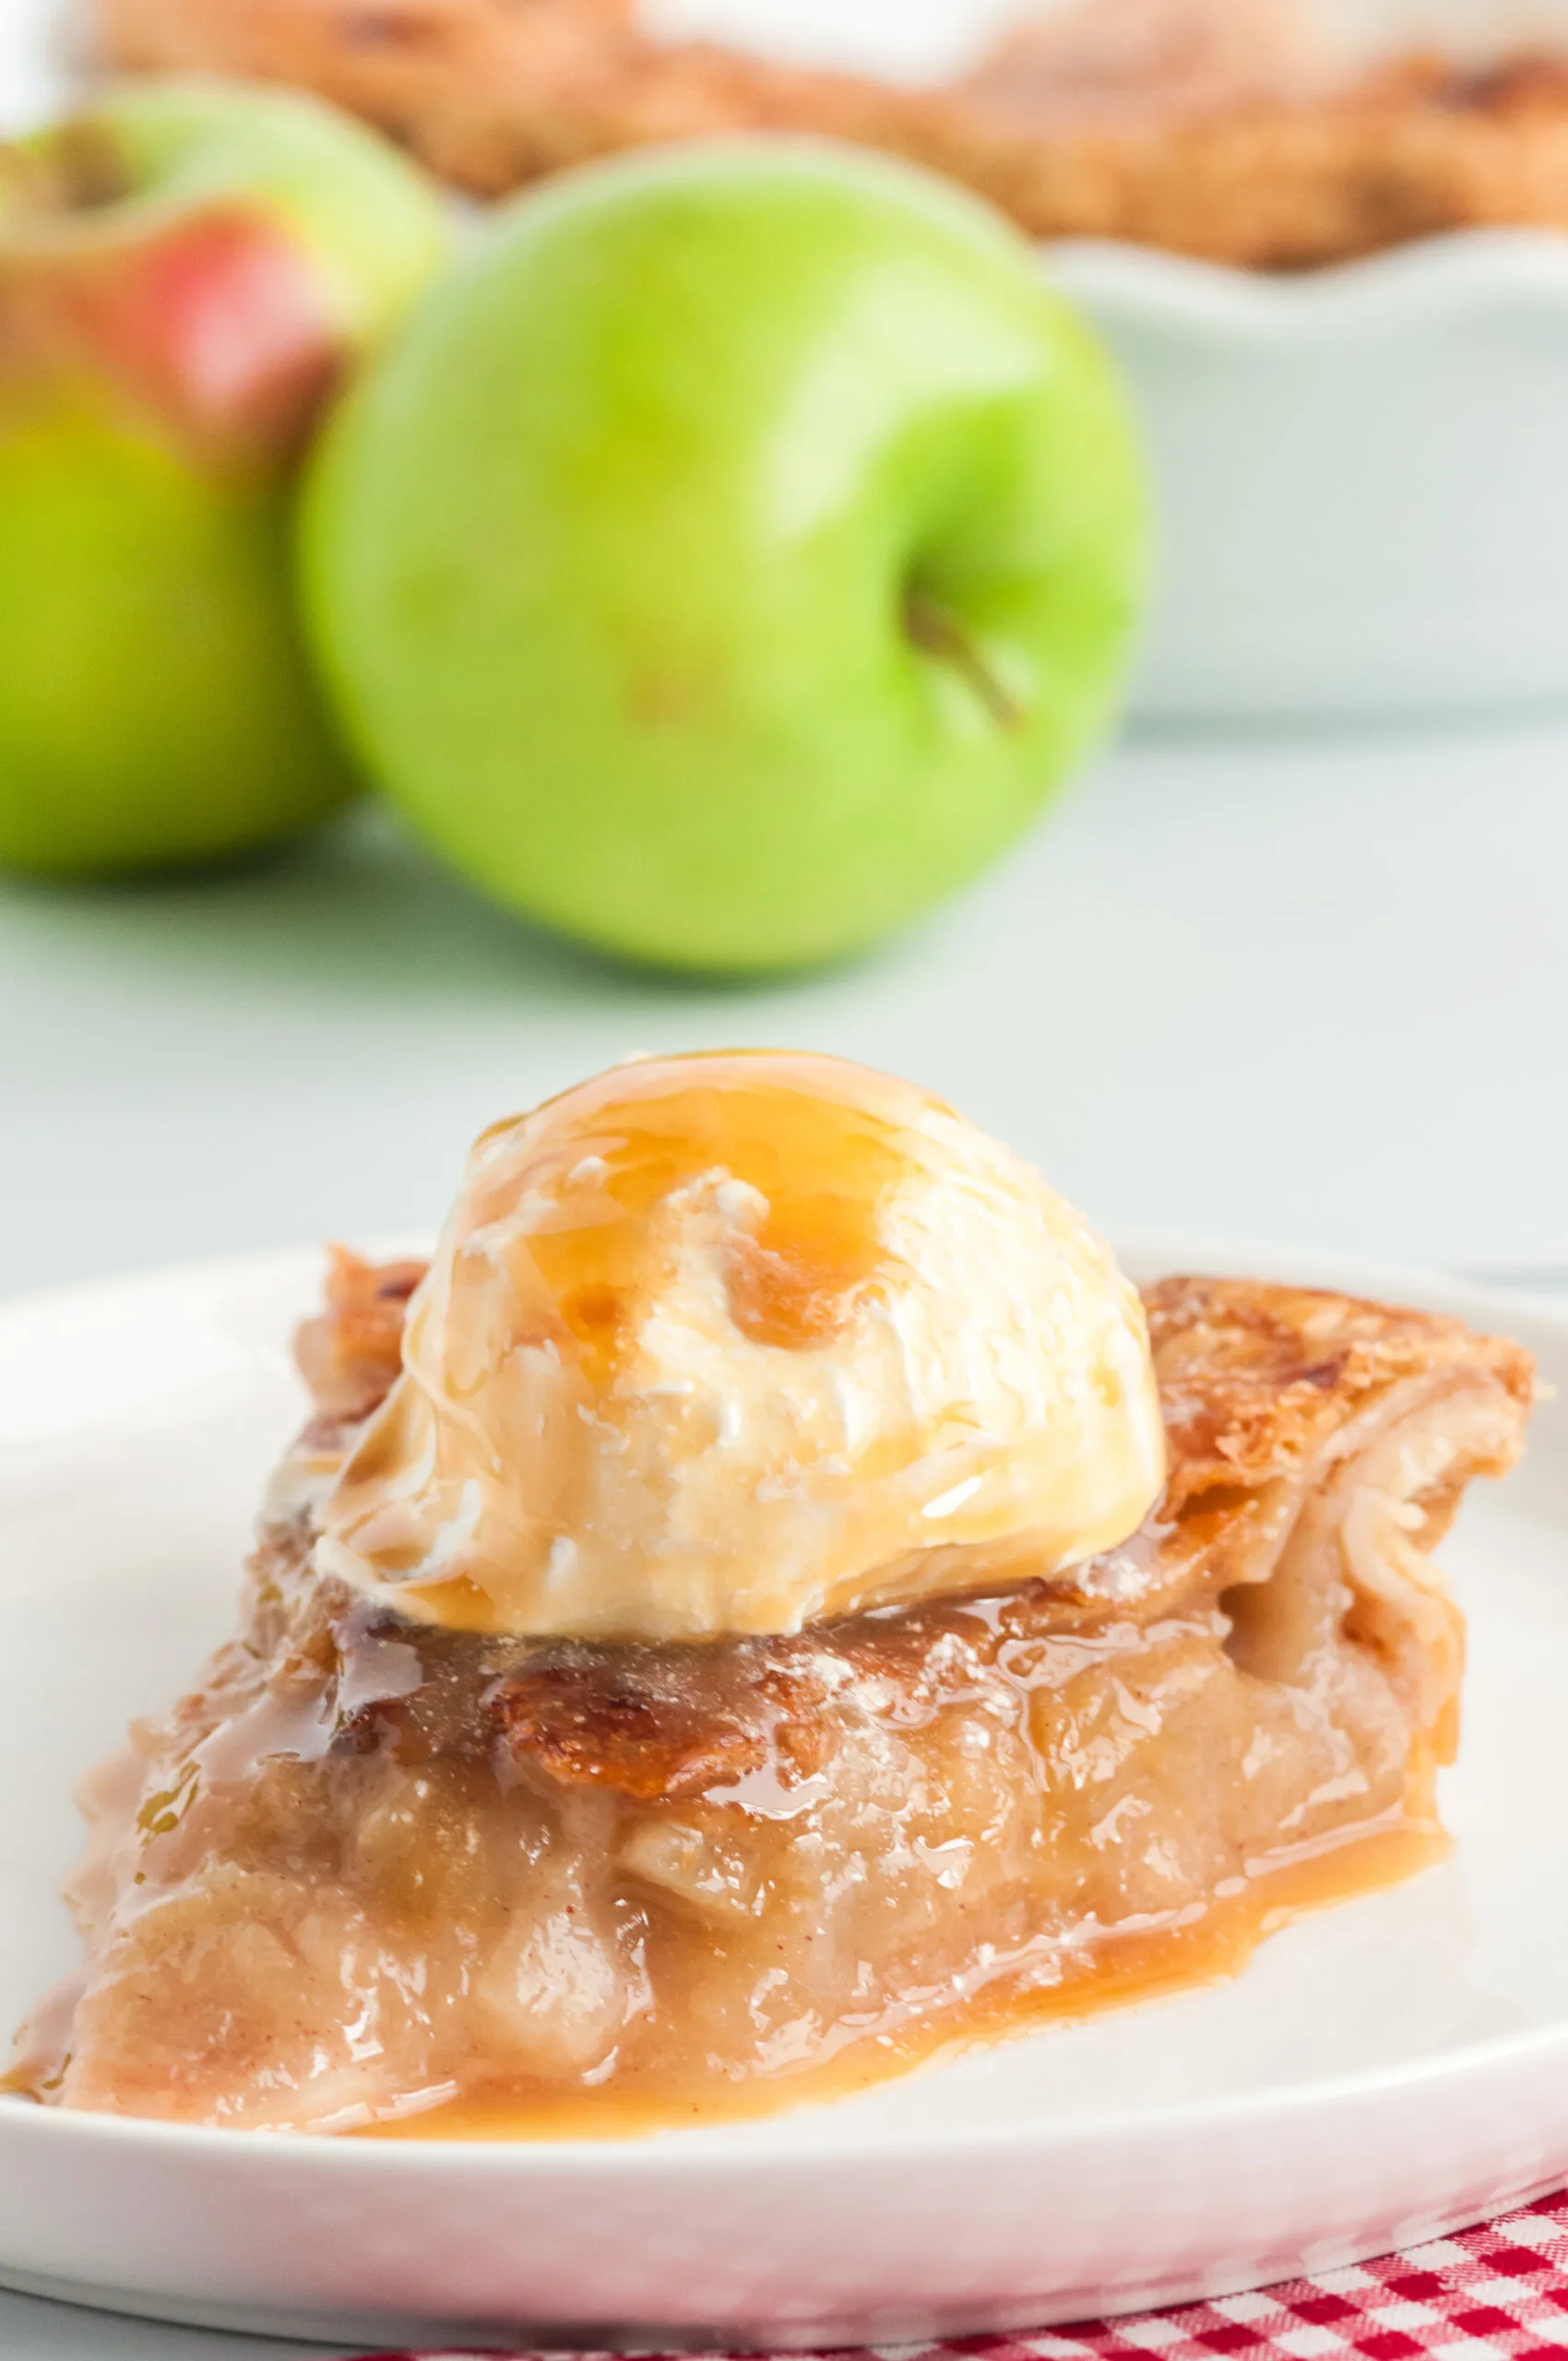 mouthwatering apple pie with caramel drizzled all over it.